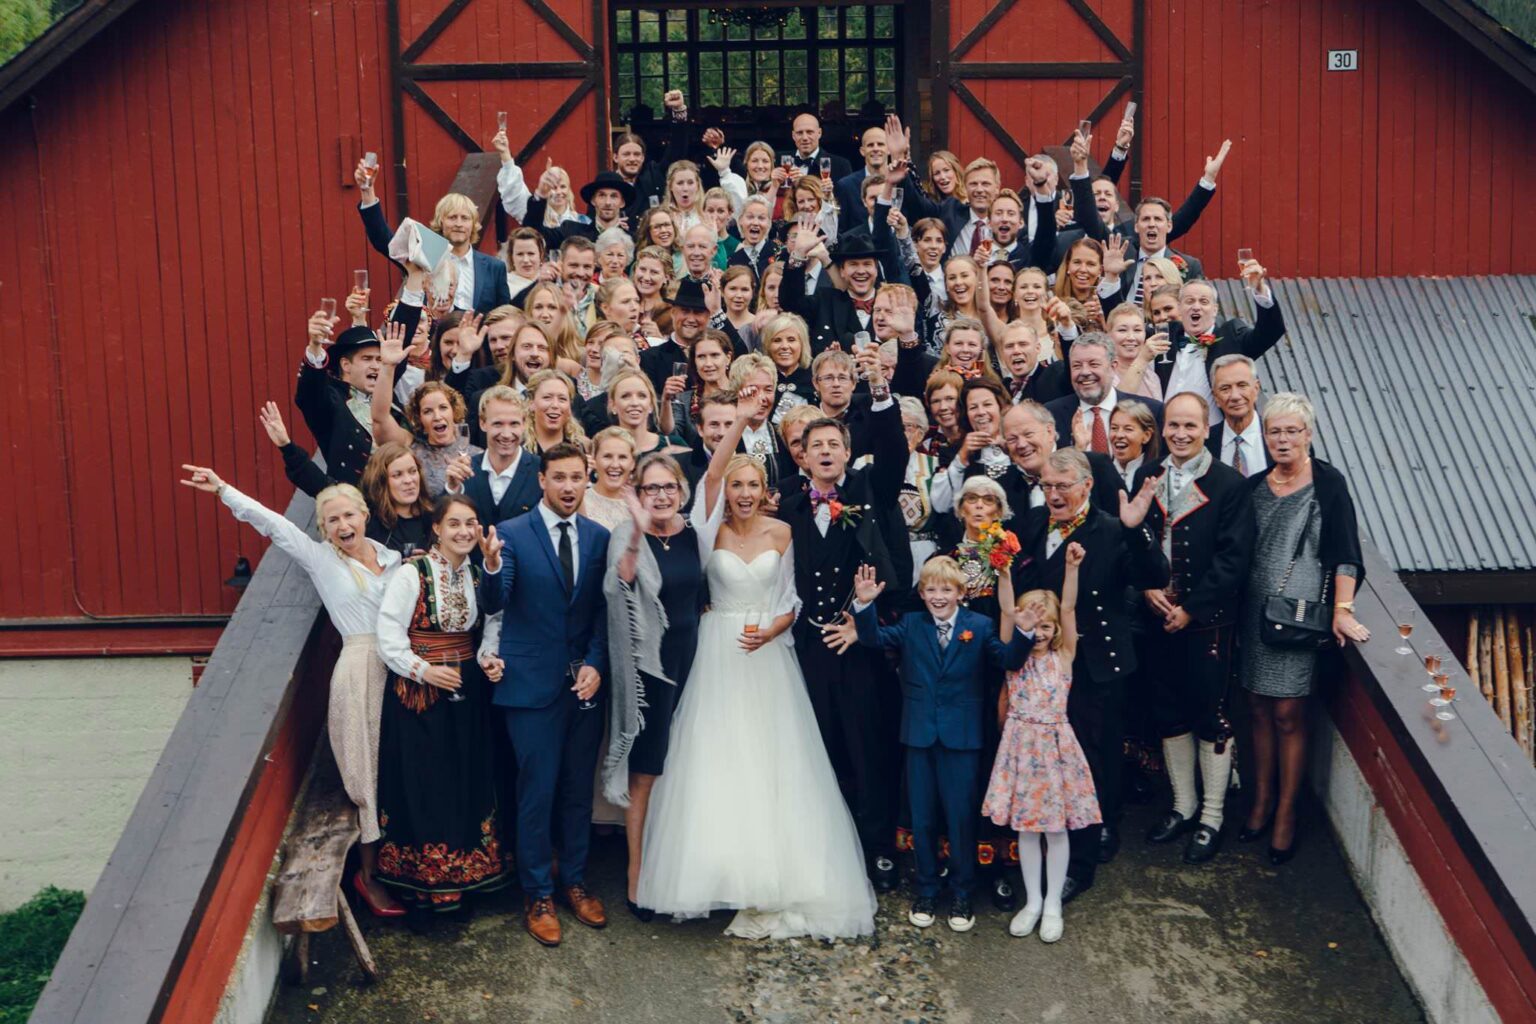 Wedding picture in front of the barn / Bryllupsbilde foran låven